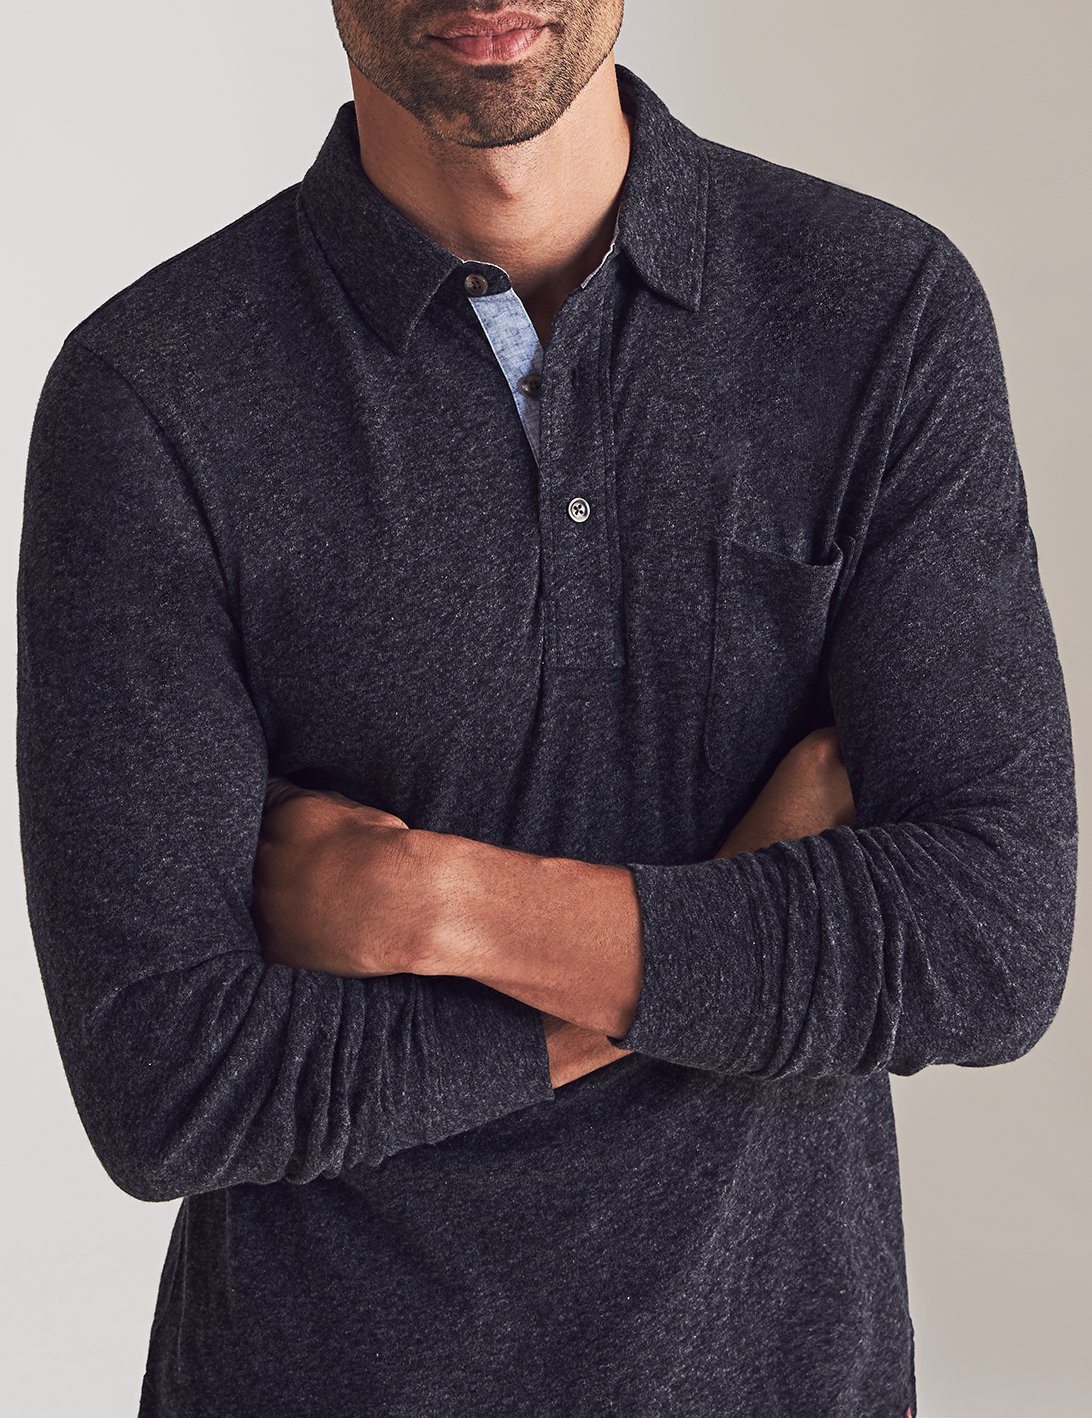 Download Faherty Men's Lux Long Sleeve Heather Polo Solid | eBay